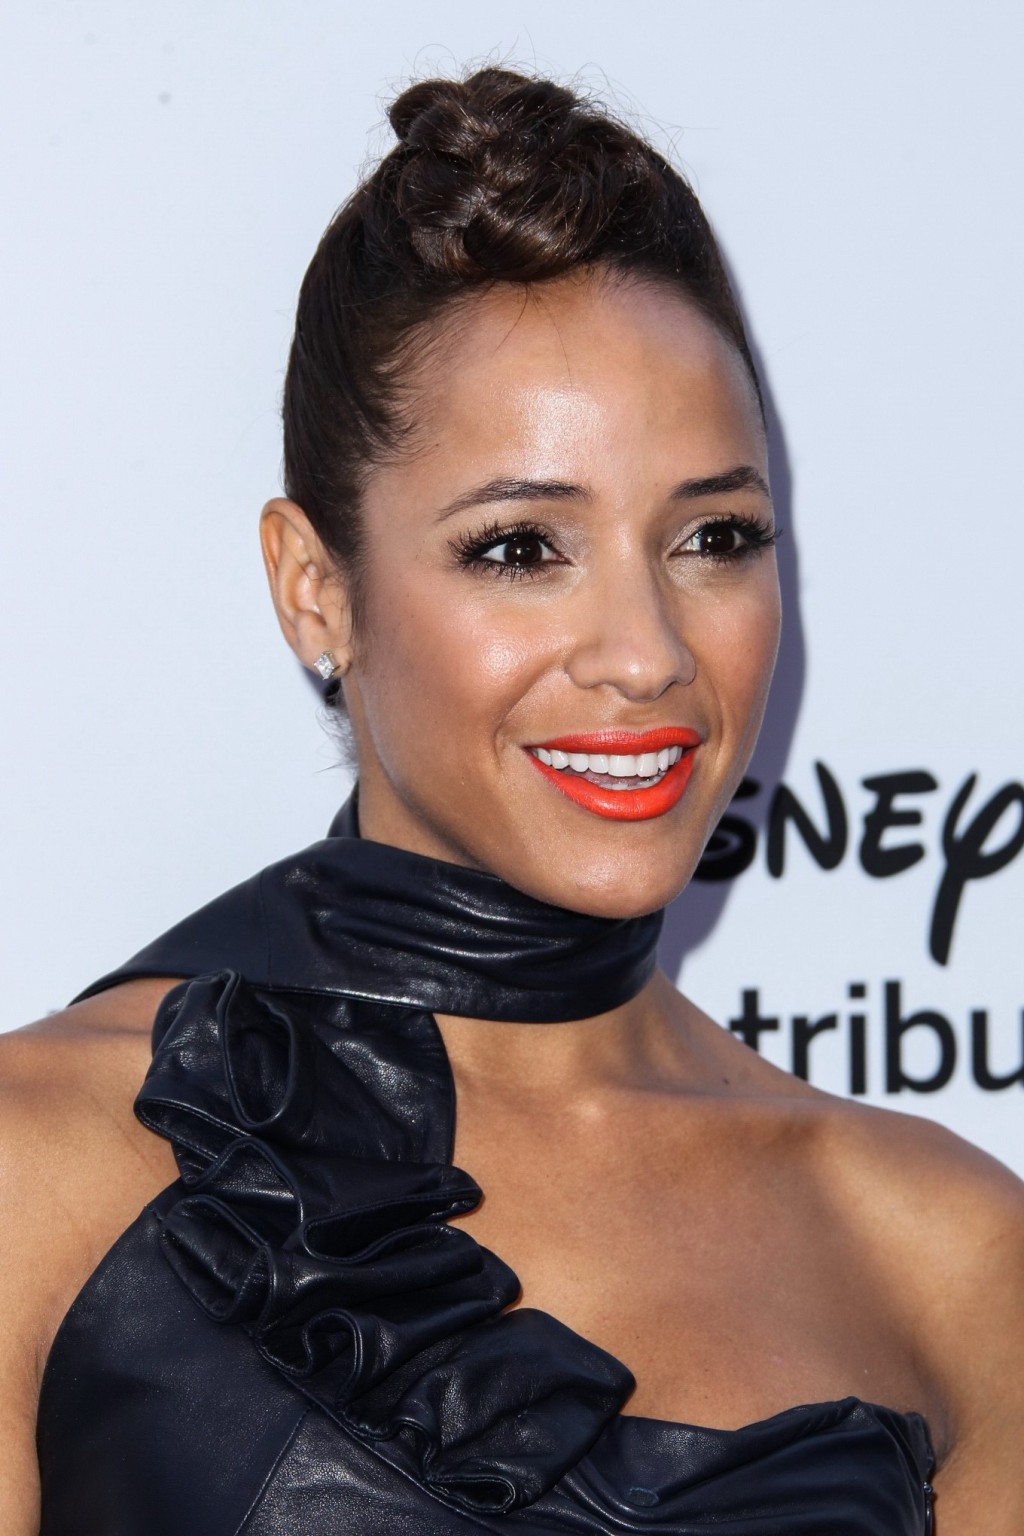 Dania Ramirez showing off her curvy body in a leather mini dress at the event in #75201473